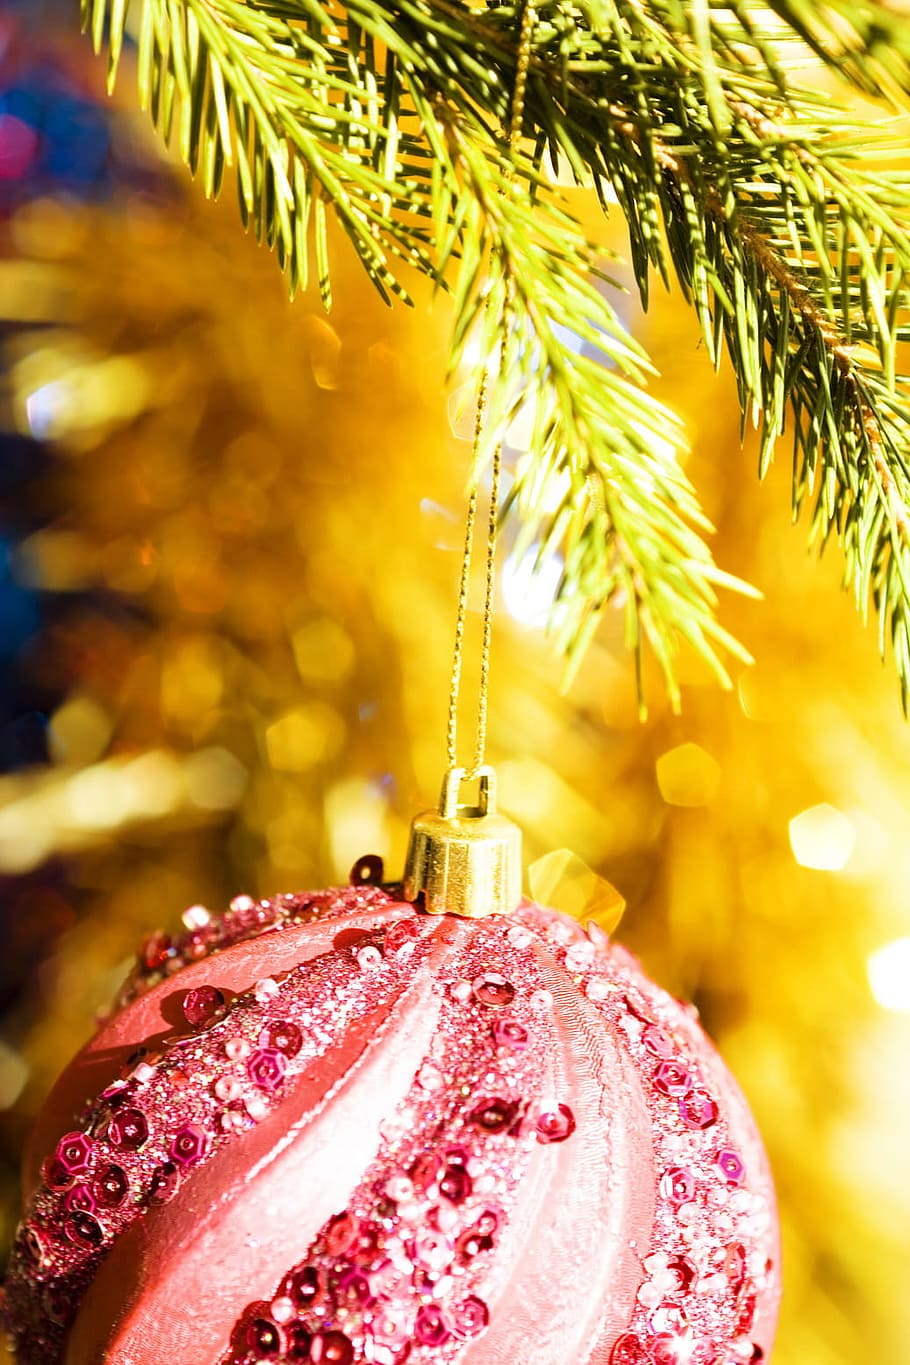 ball, bauble, branch, bright, celebration, christmas, christmas-tree, color, conifer, coniferous